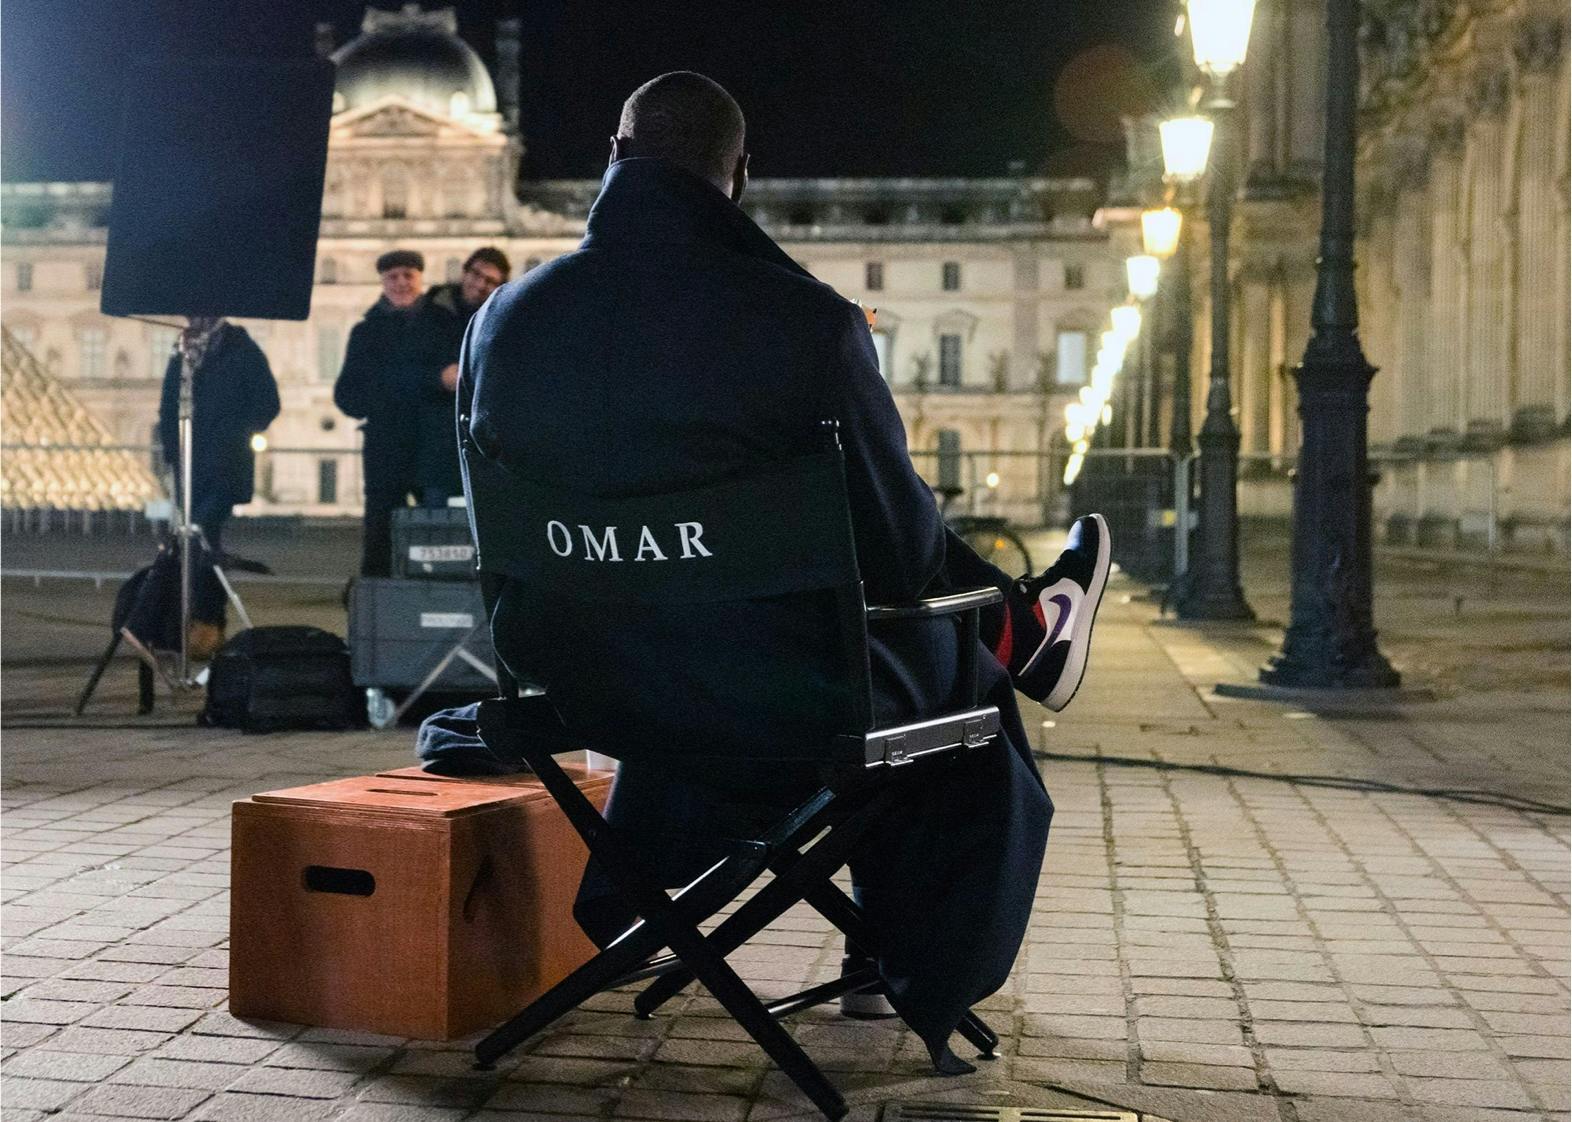 Omar Sy sits in a black set chair with his name embroidered in white on the back. He wears dark clothing and his signature jordans. The nighttime scene is lit by lamps, and the Louvre pyramid is visible to the left. Crew mingle in front of Omar.